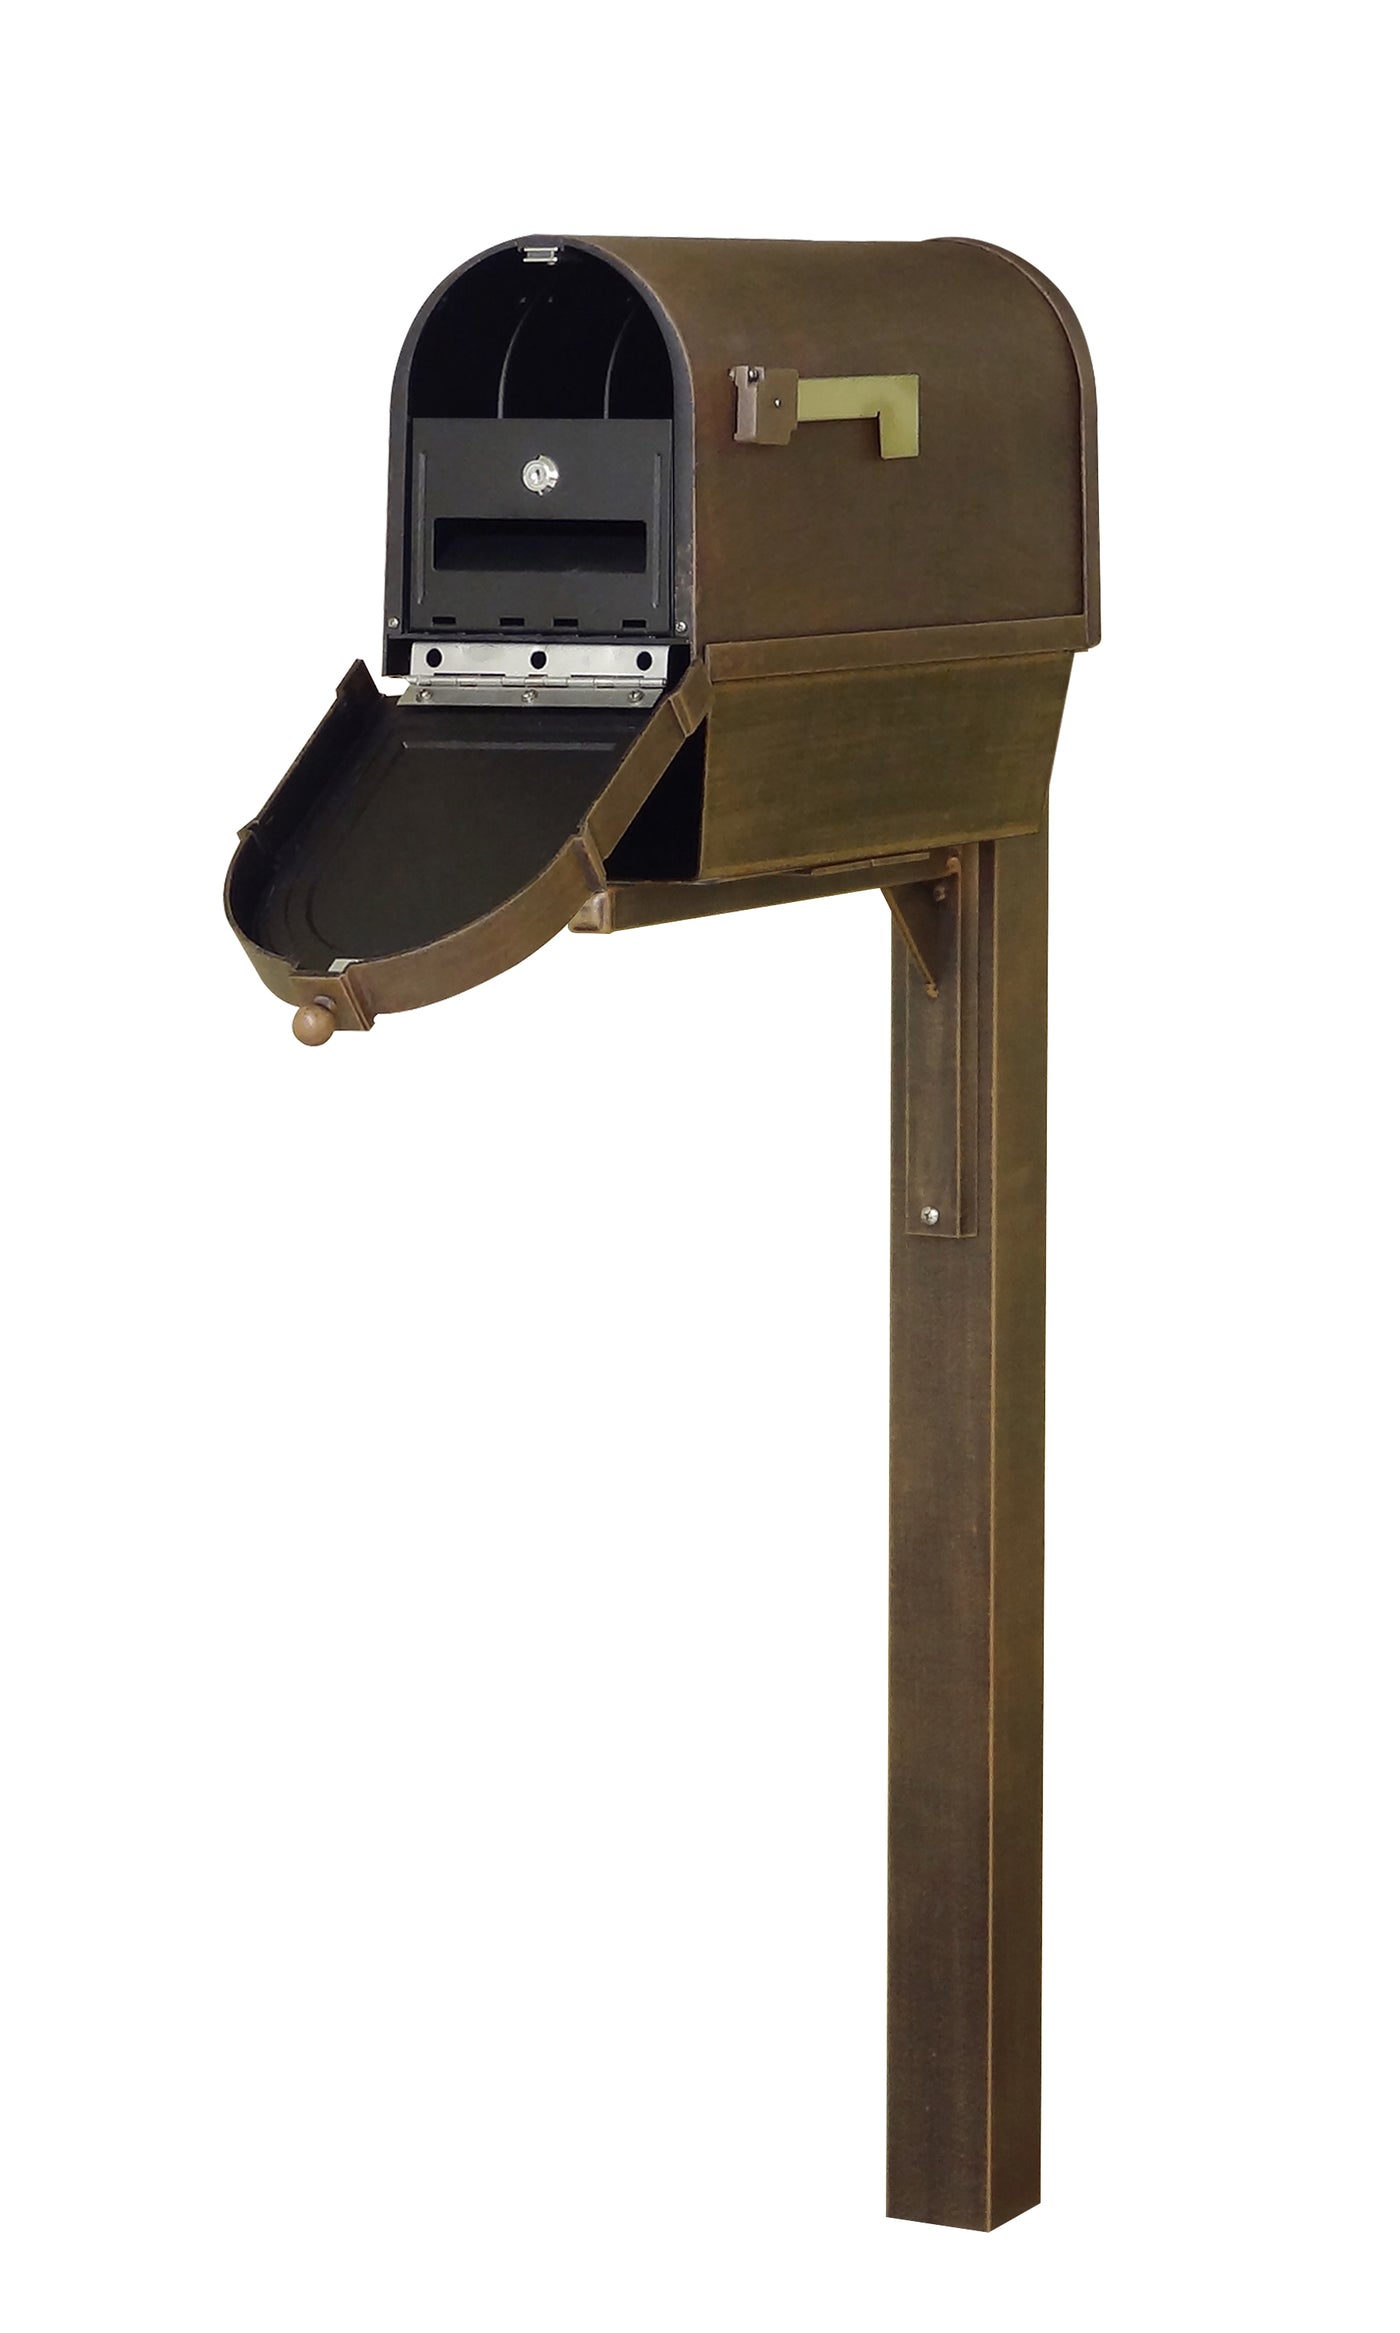 Berkshire Curbside Mailbox with Newspaper Tube, Locking Insert and Wellington Mailbox Post